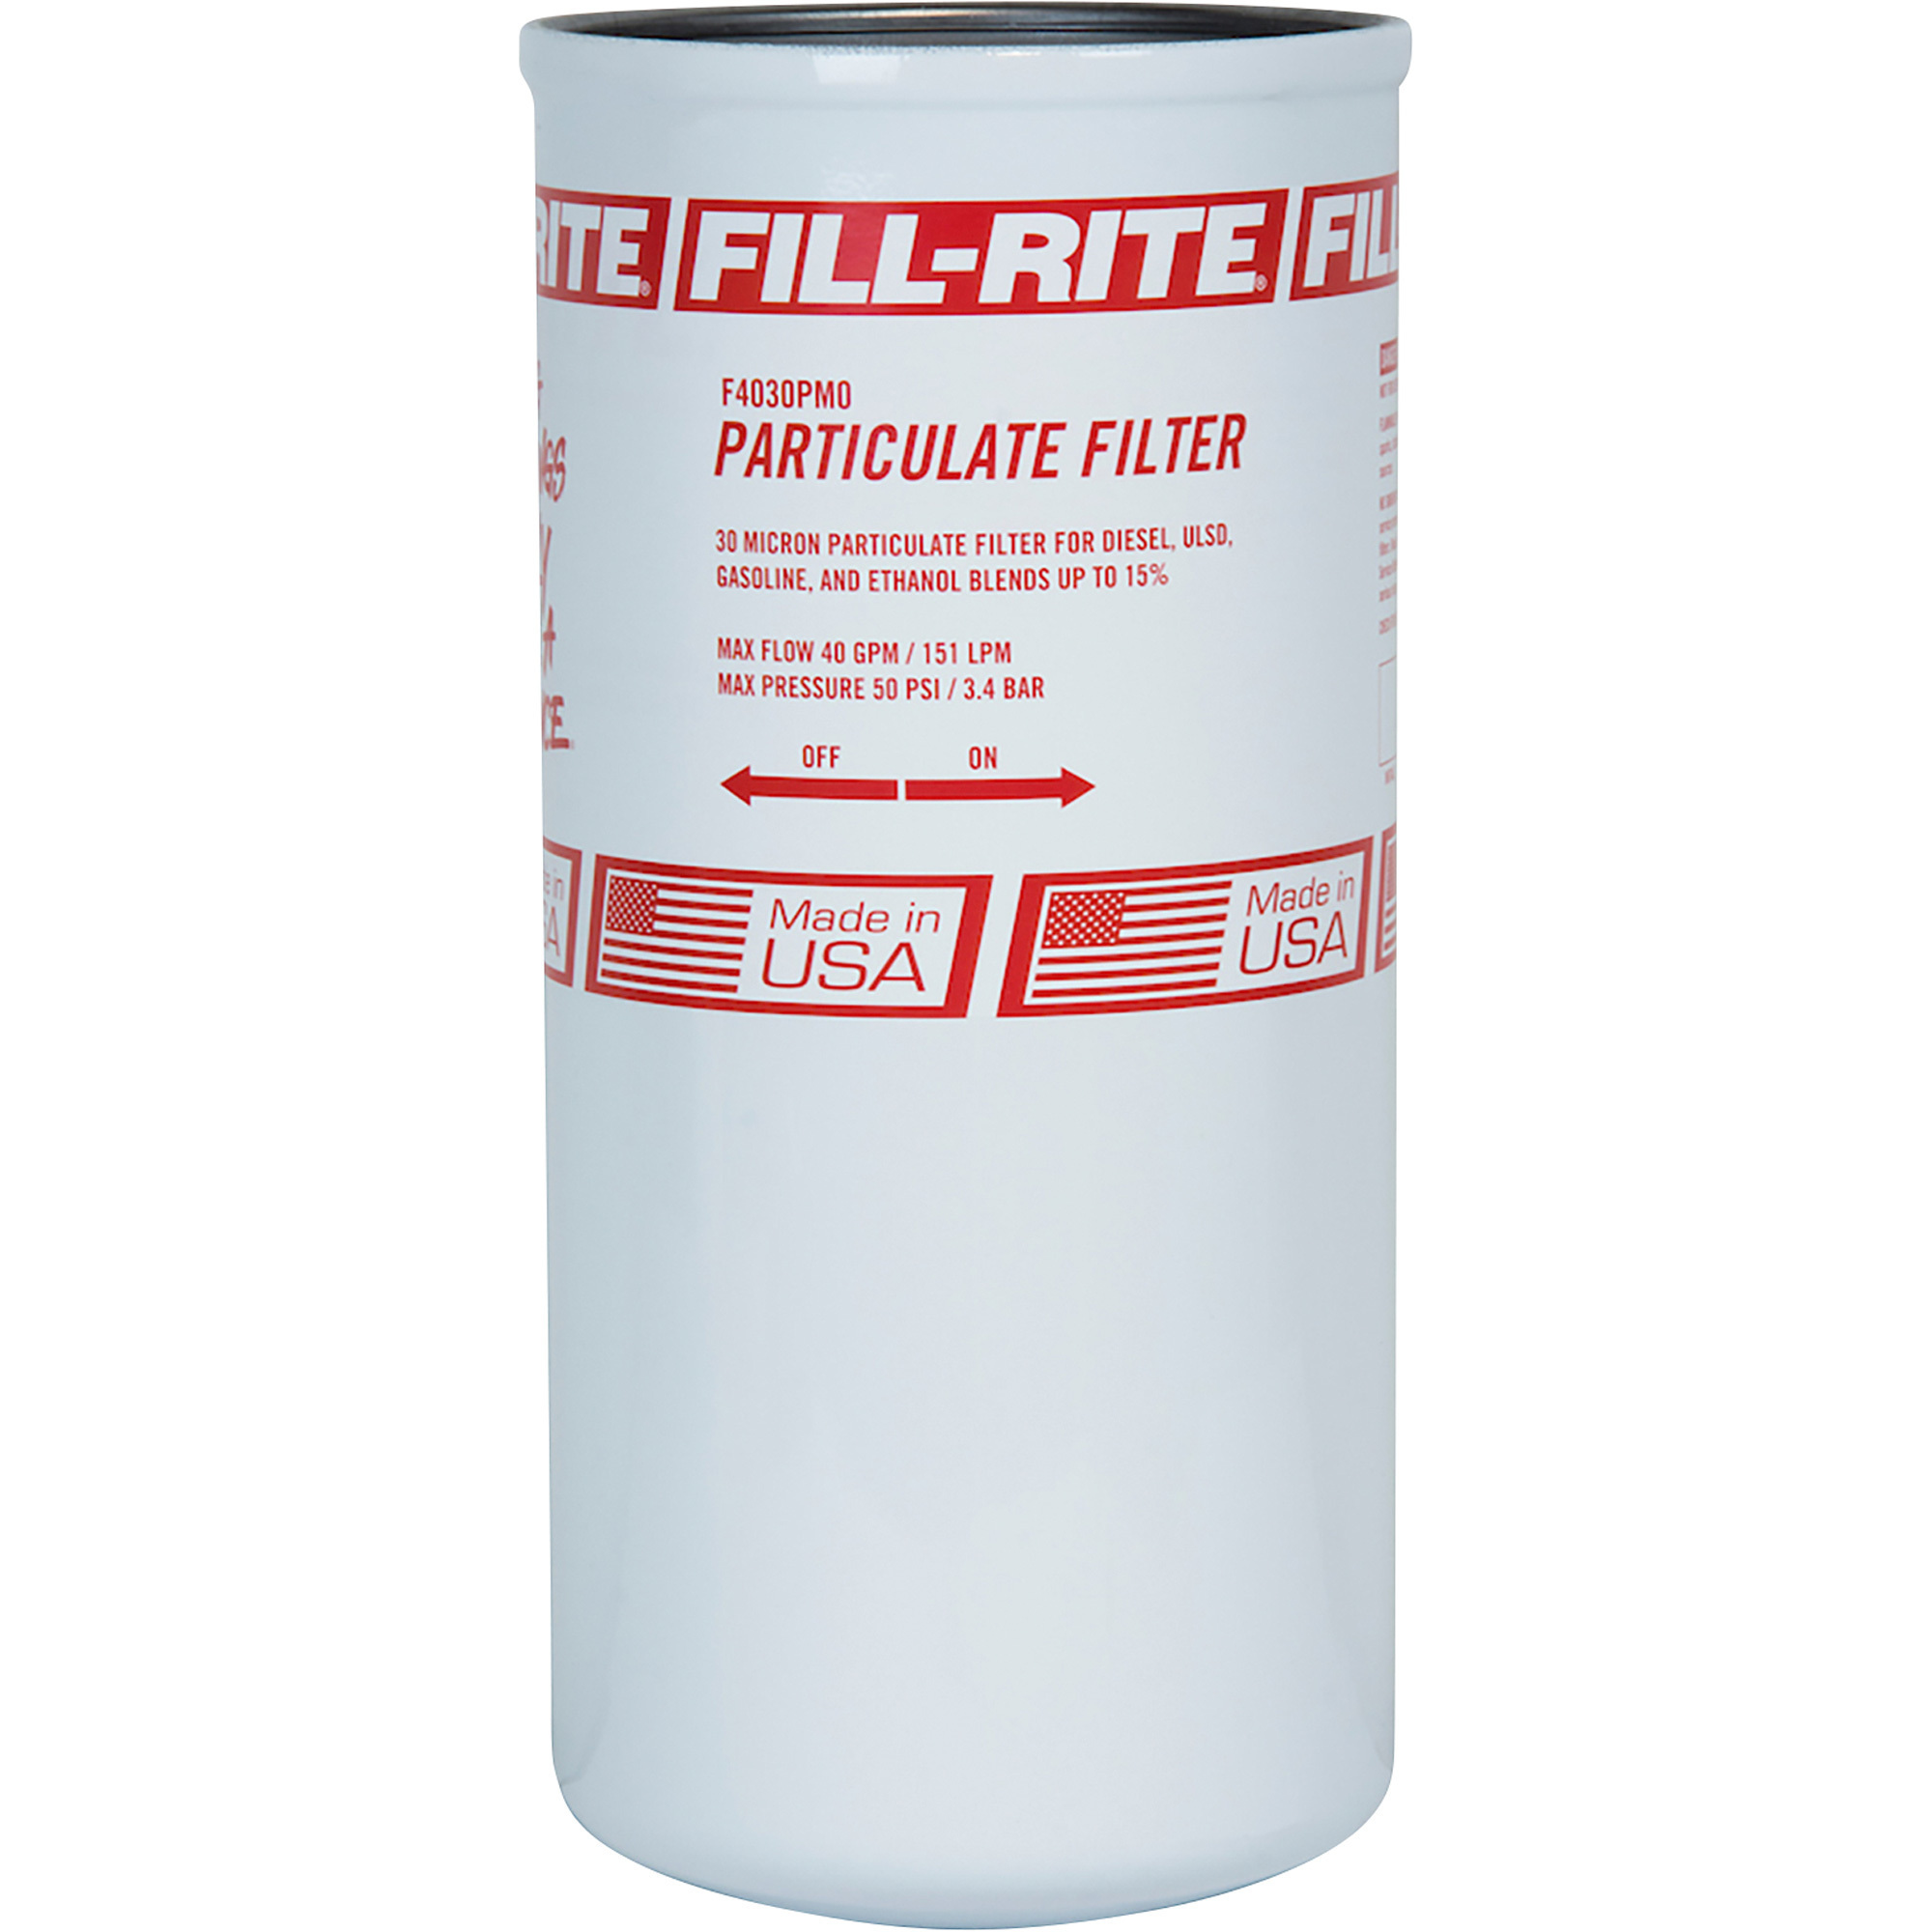 Fill-Rite 30 Micron Spin-On Particulate Fuel Filter â 40 GPM, Model F4030PM0